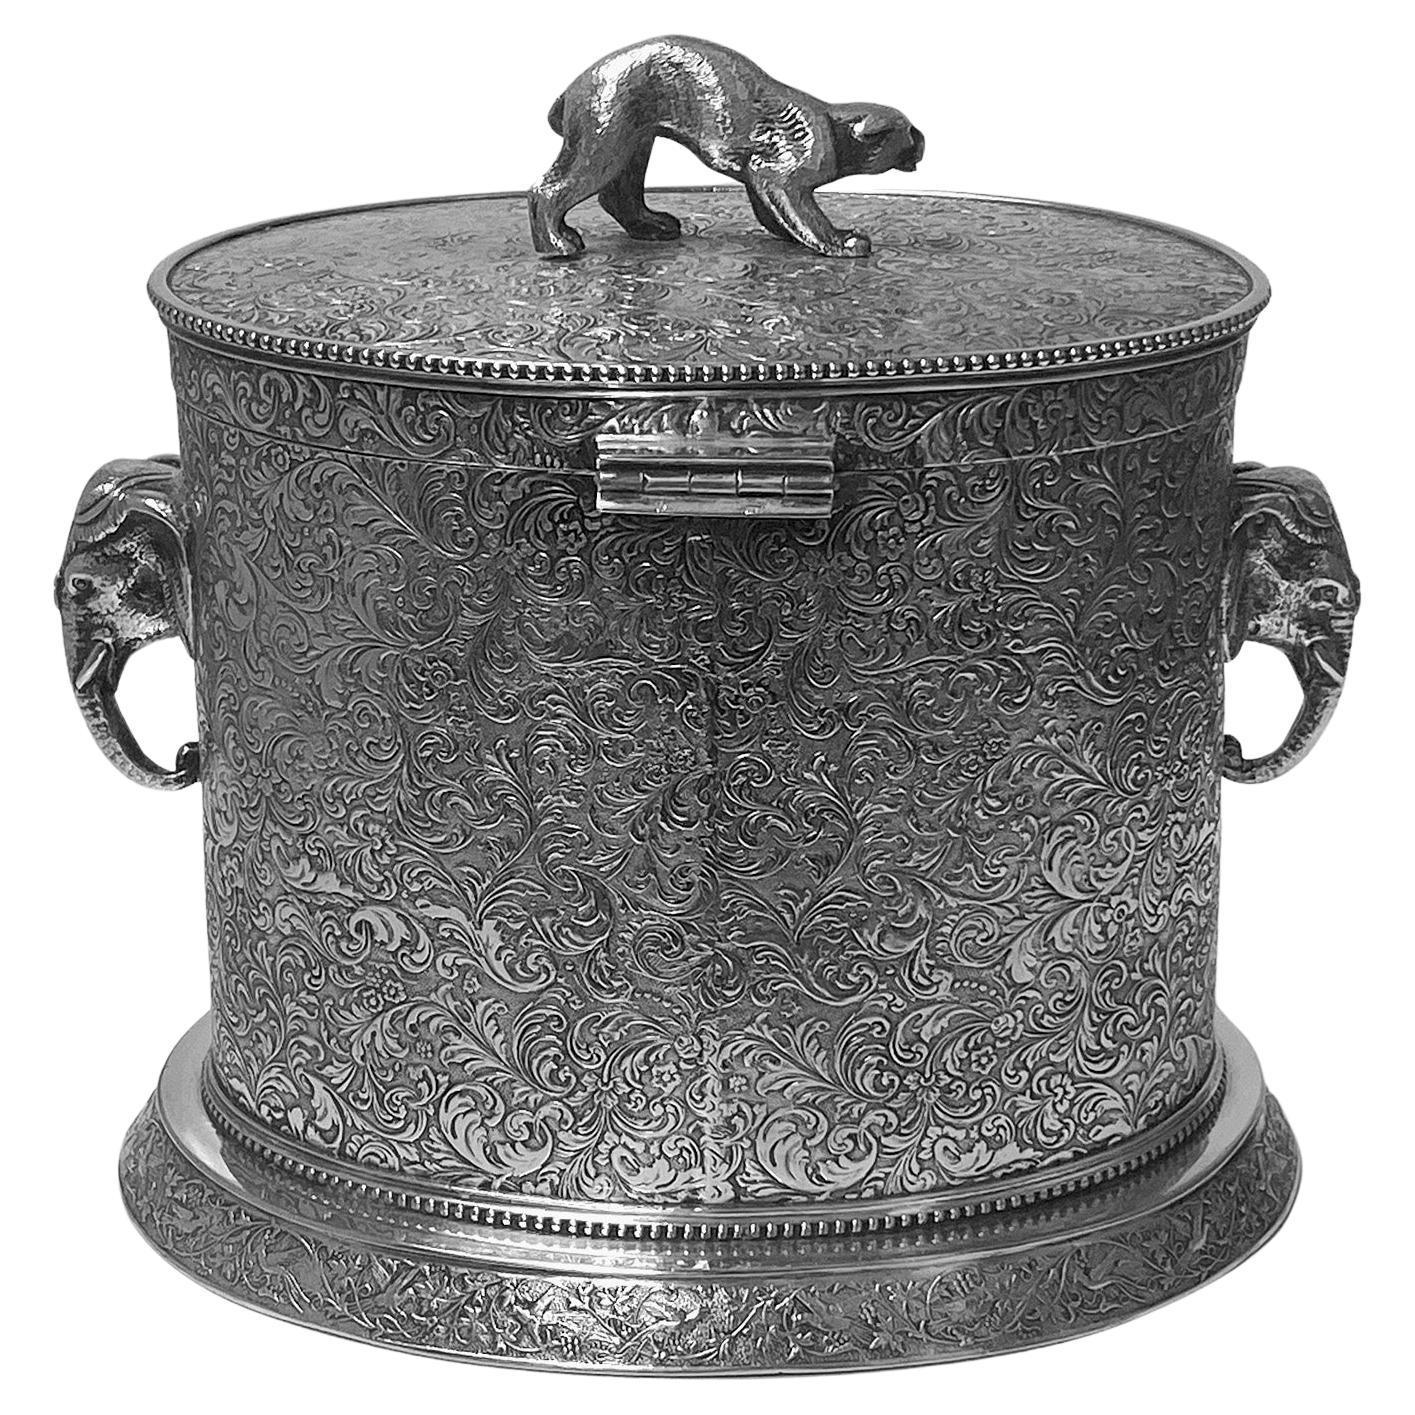 Silver Plate Antique Anglo-Indian Style Large Biscuit Box, Silber & Fleming, C. 1880